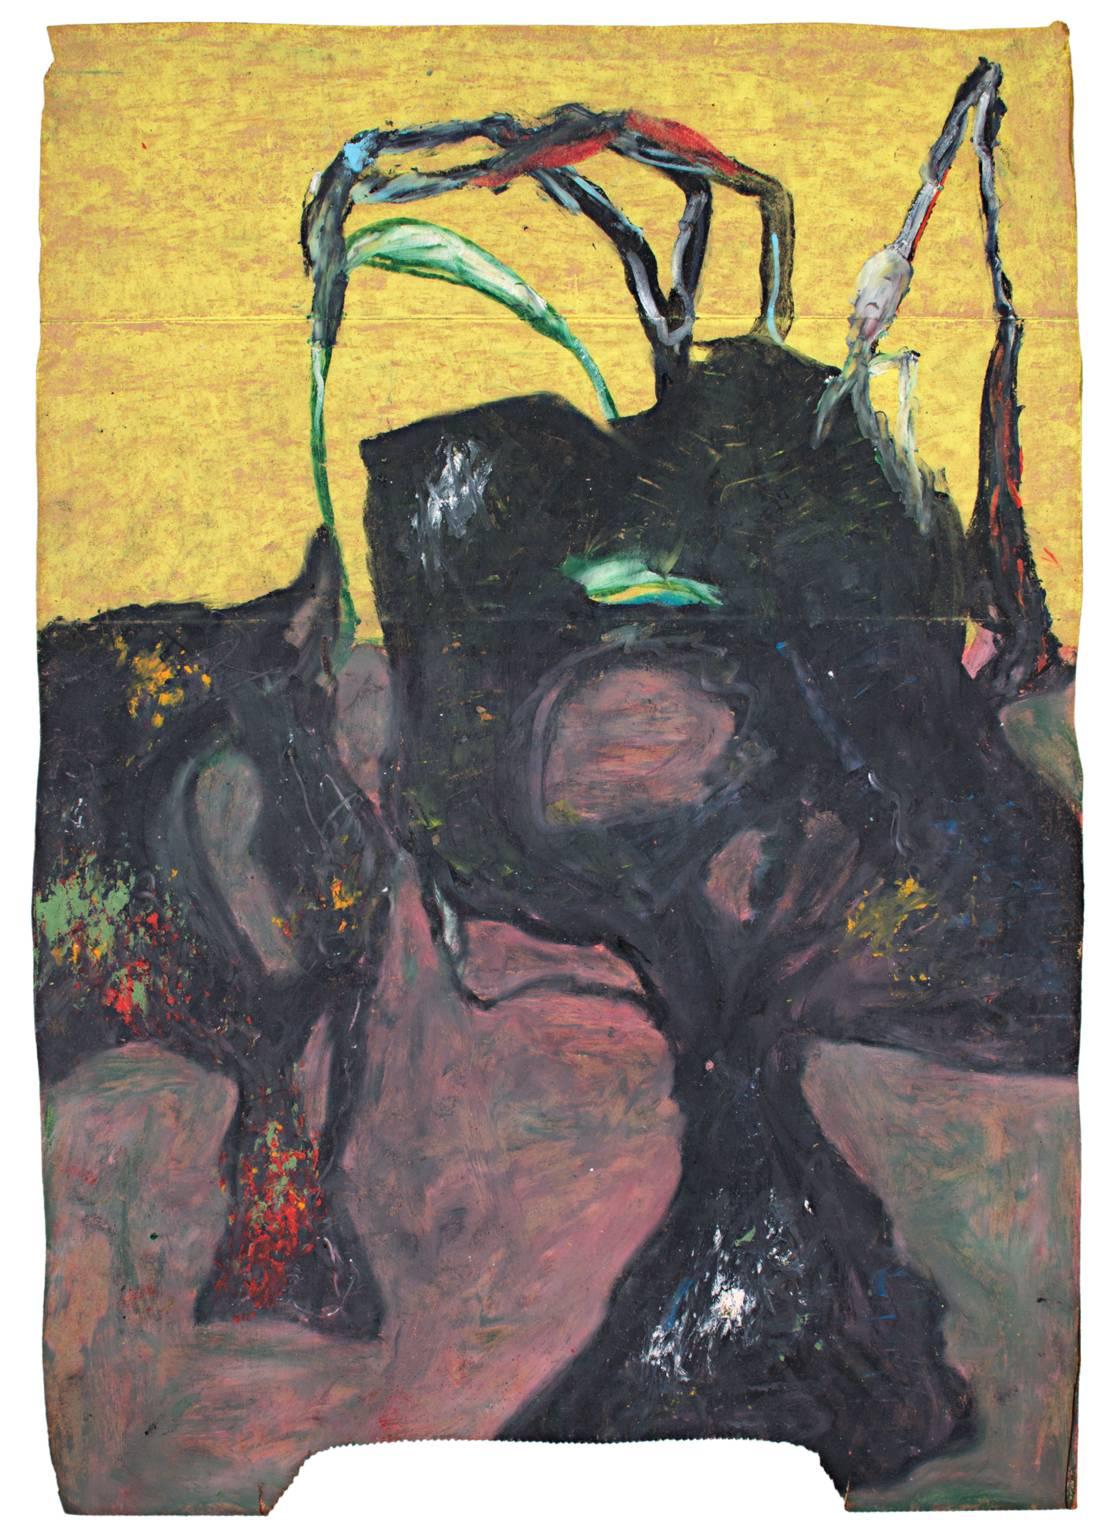 "Hollowsphere" is an original oil pastel drawing on a paper bag by Reginald K. Gee. It depicts abstract forms in black, yellow, green, and red. The artist signed the piece on the back. 

16 1/2" x 11 3/4" art

Reginald K. Gee was born in Milwaukee